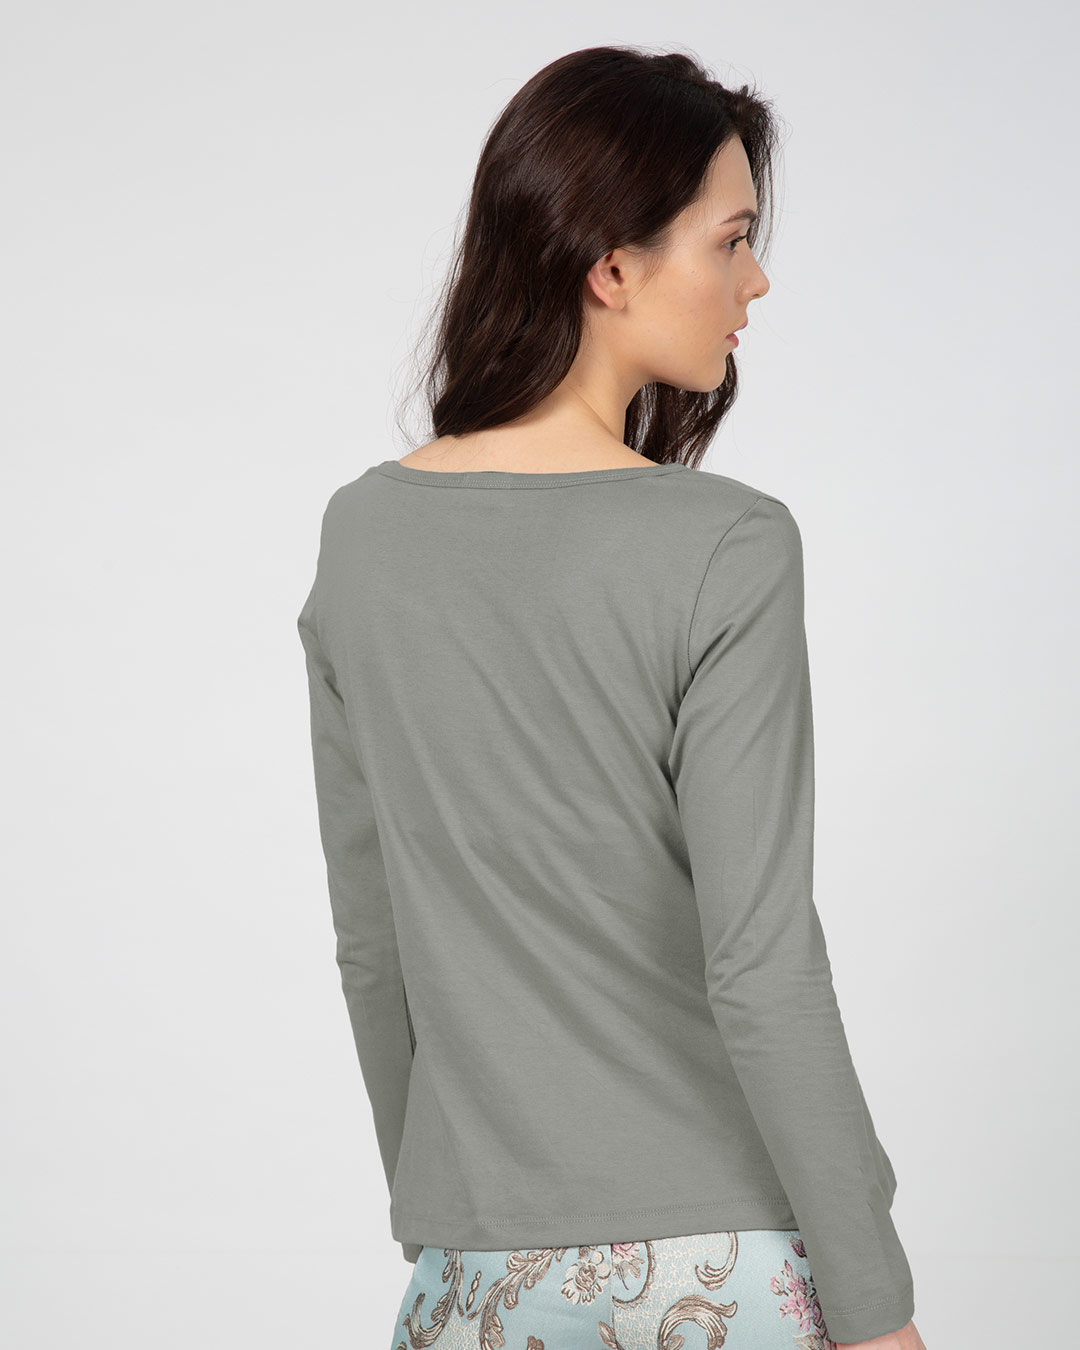 Shop Today Is A Fantastic Day Scoop Neck Full Sleeve T-Shirt-Back